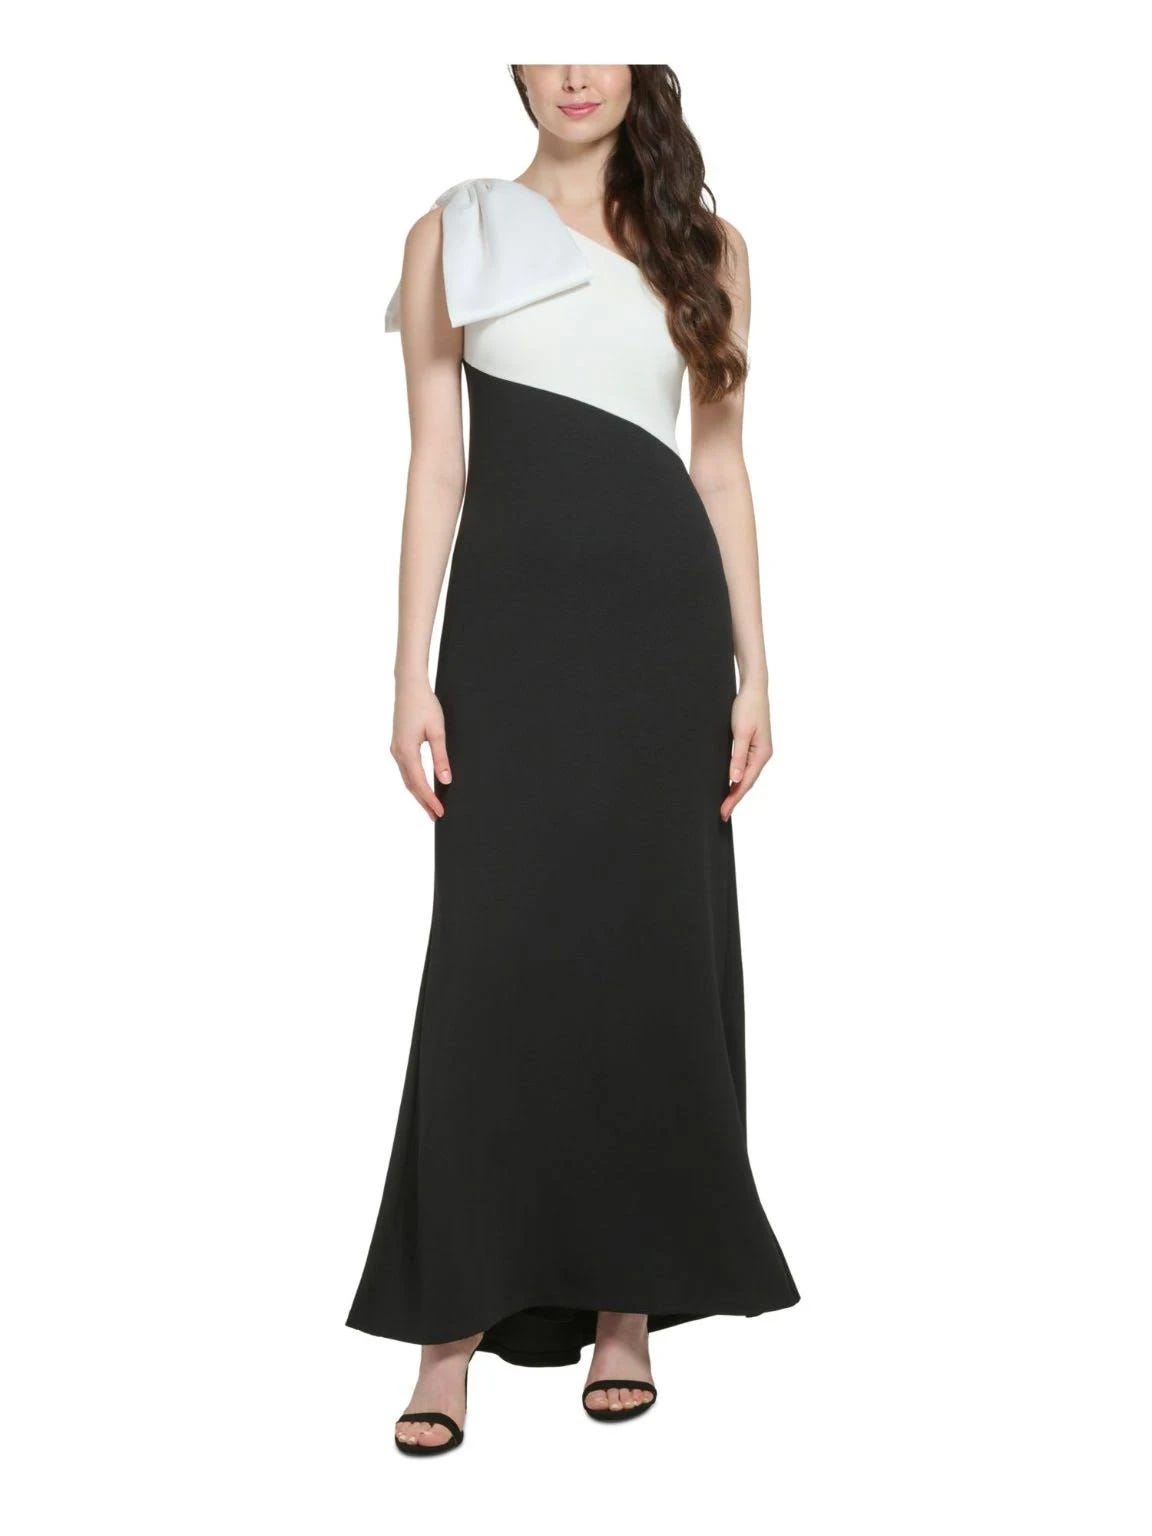 Stylish One-Shoulder Colorblock Gown for Formal Events | Image